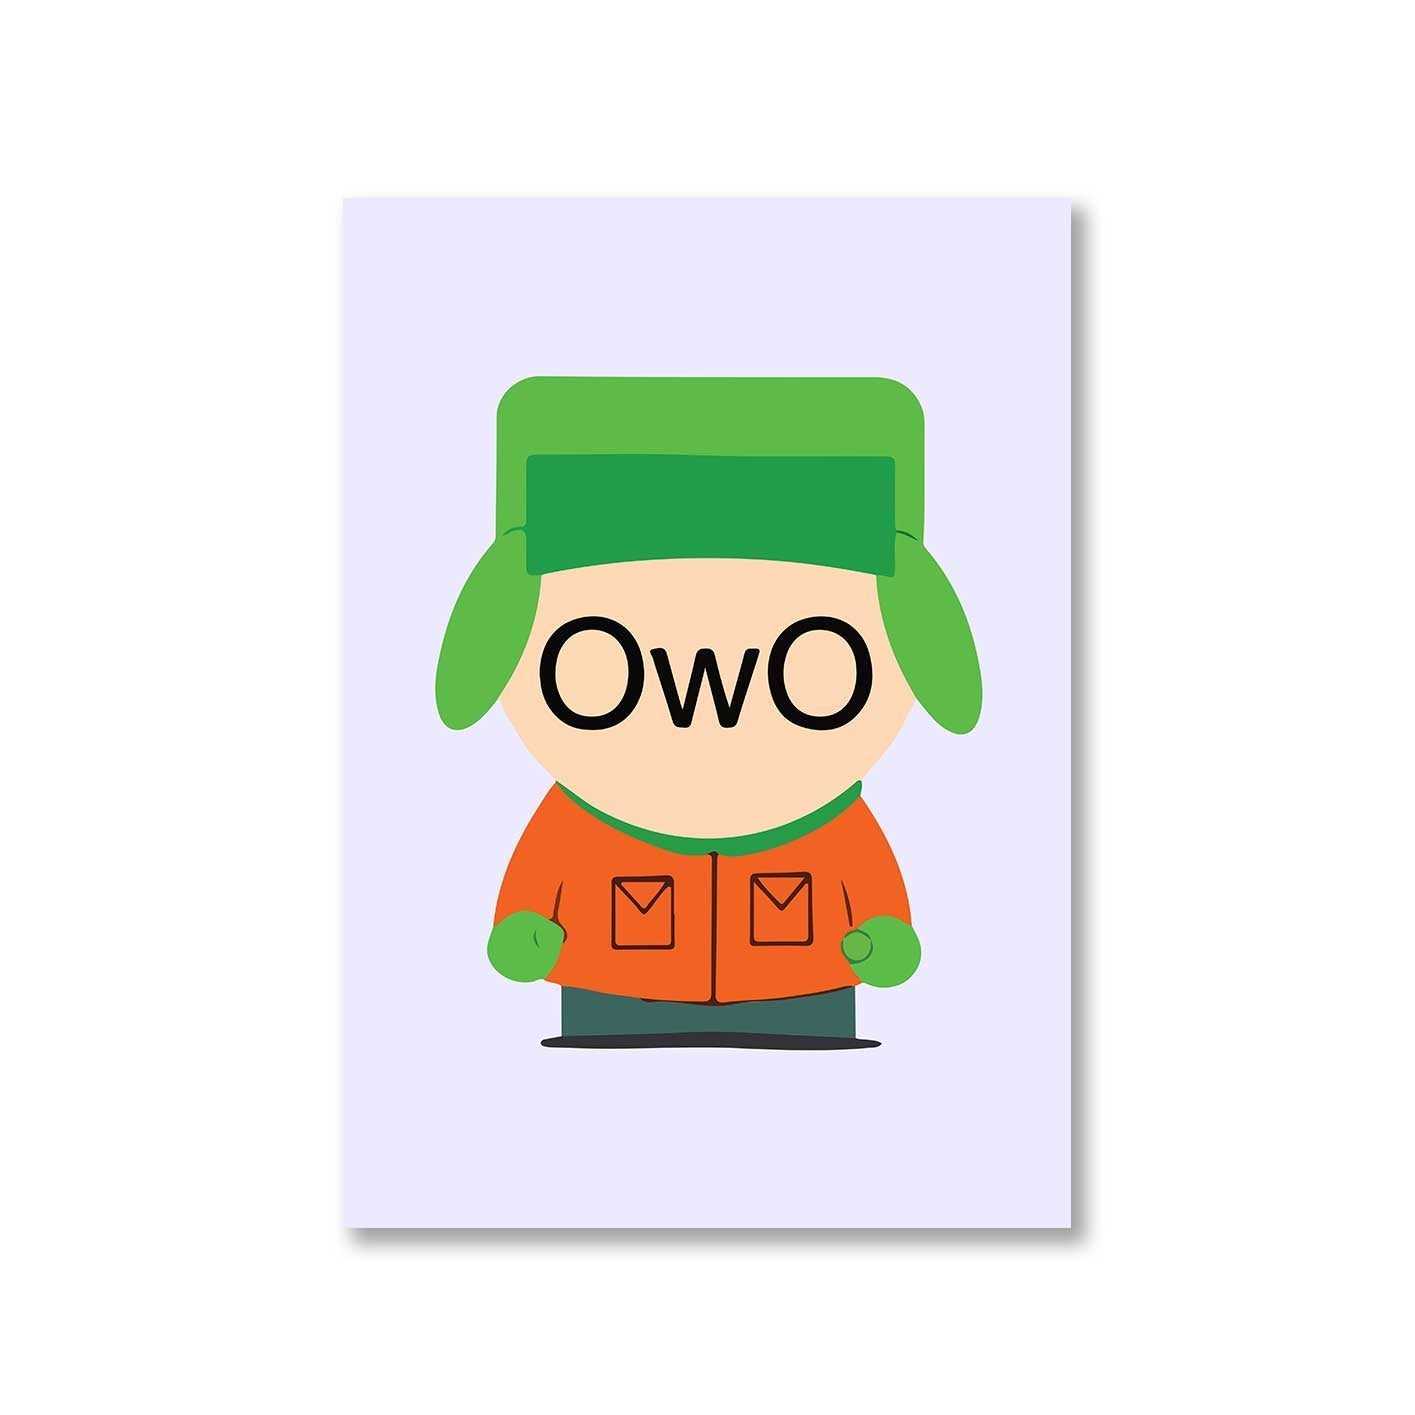 south park owo poster wall art buy online india the banyan tee tbt a4 south park kenny cartman stan kyle cartoon character illustration owo